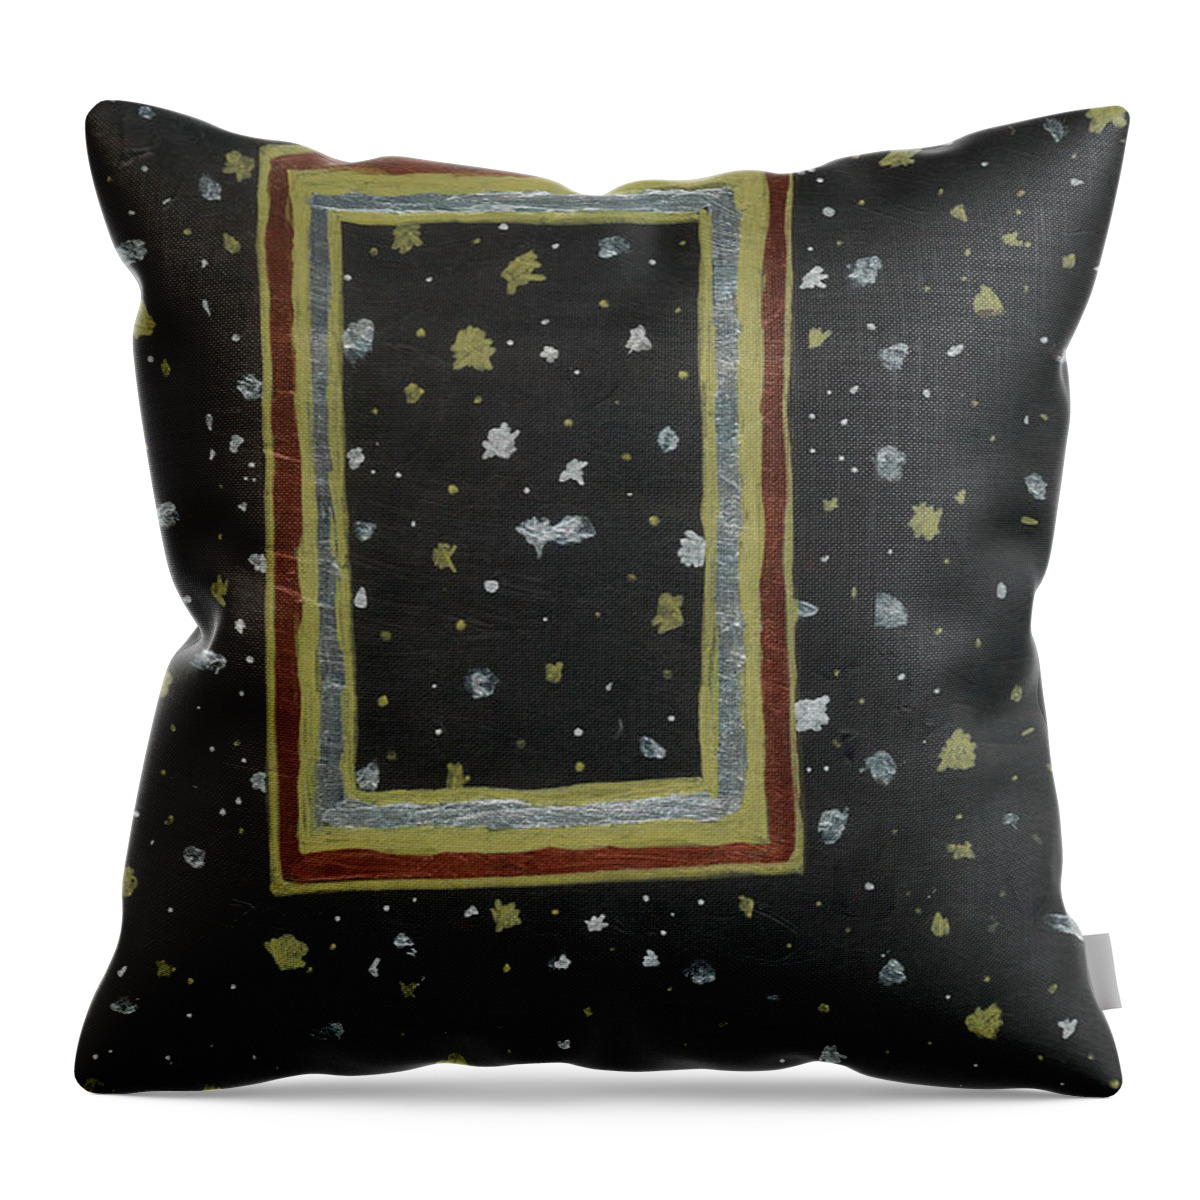 Wide Open Space Throw Pillow featuring the mixed media Wide Open Space by Curtis Sikes